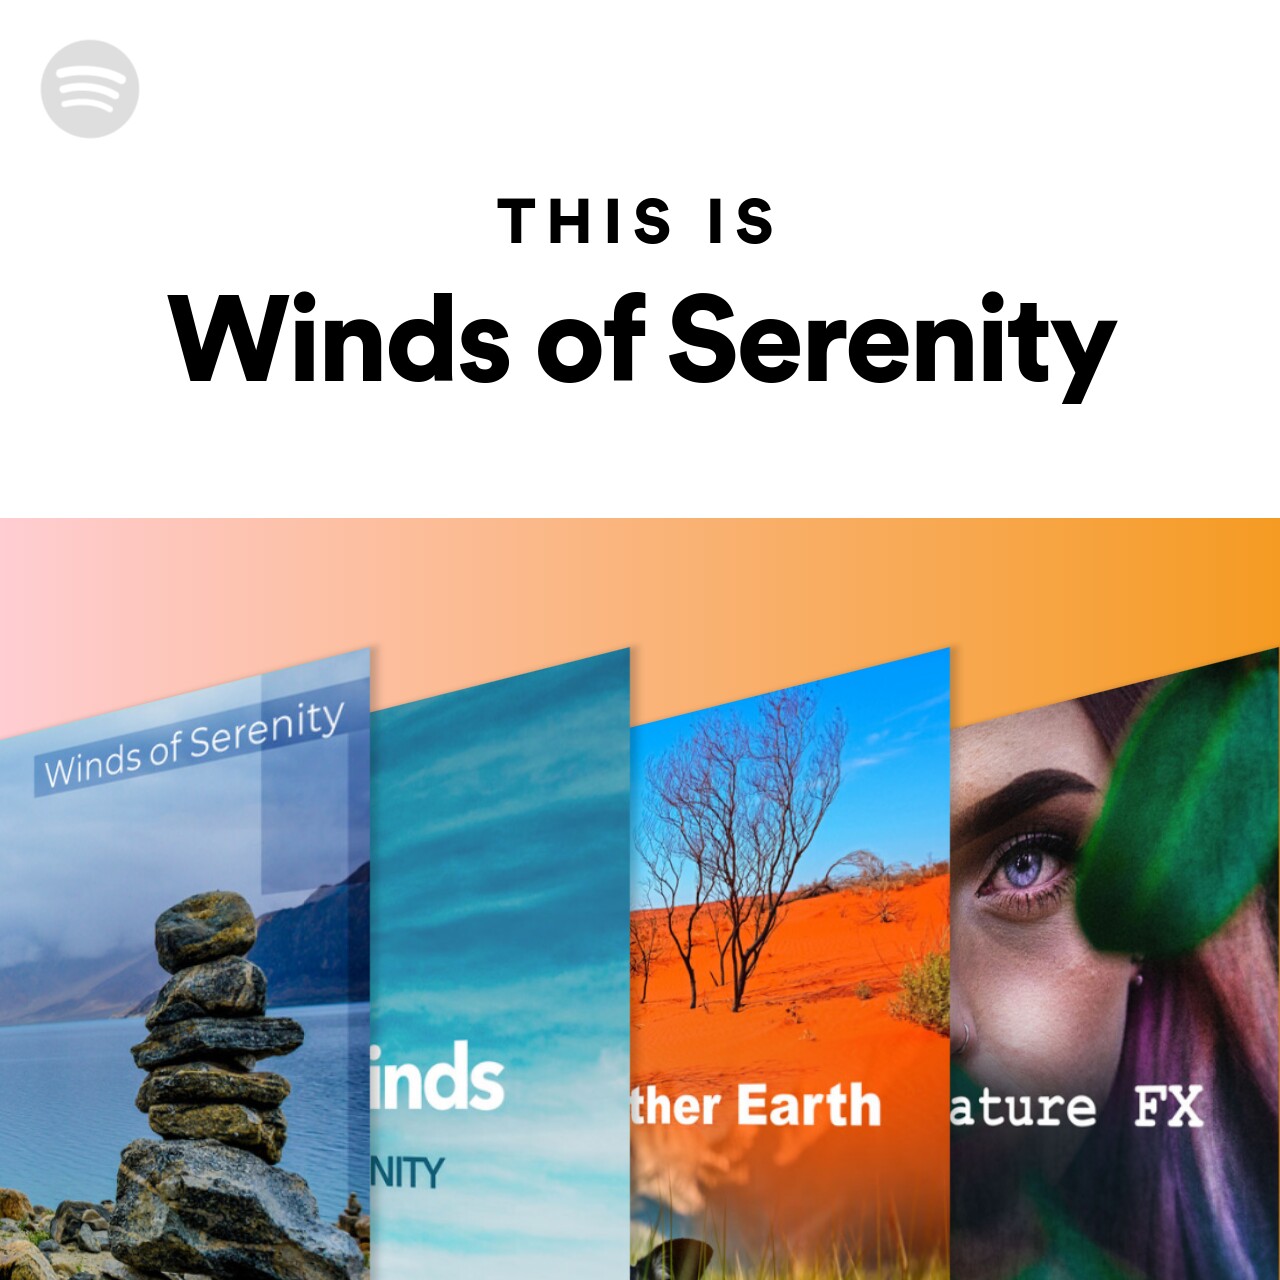 This Is Winds of Serenity